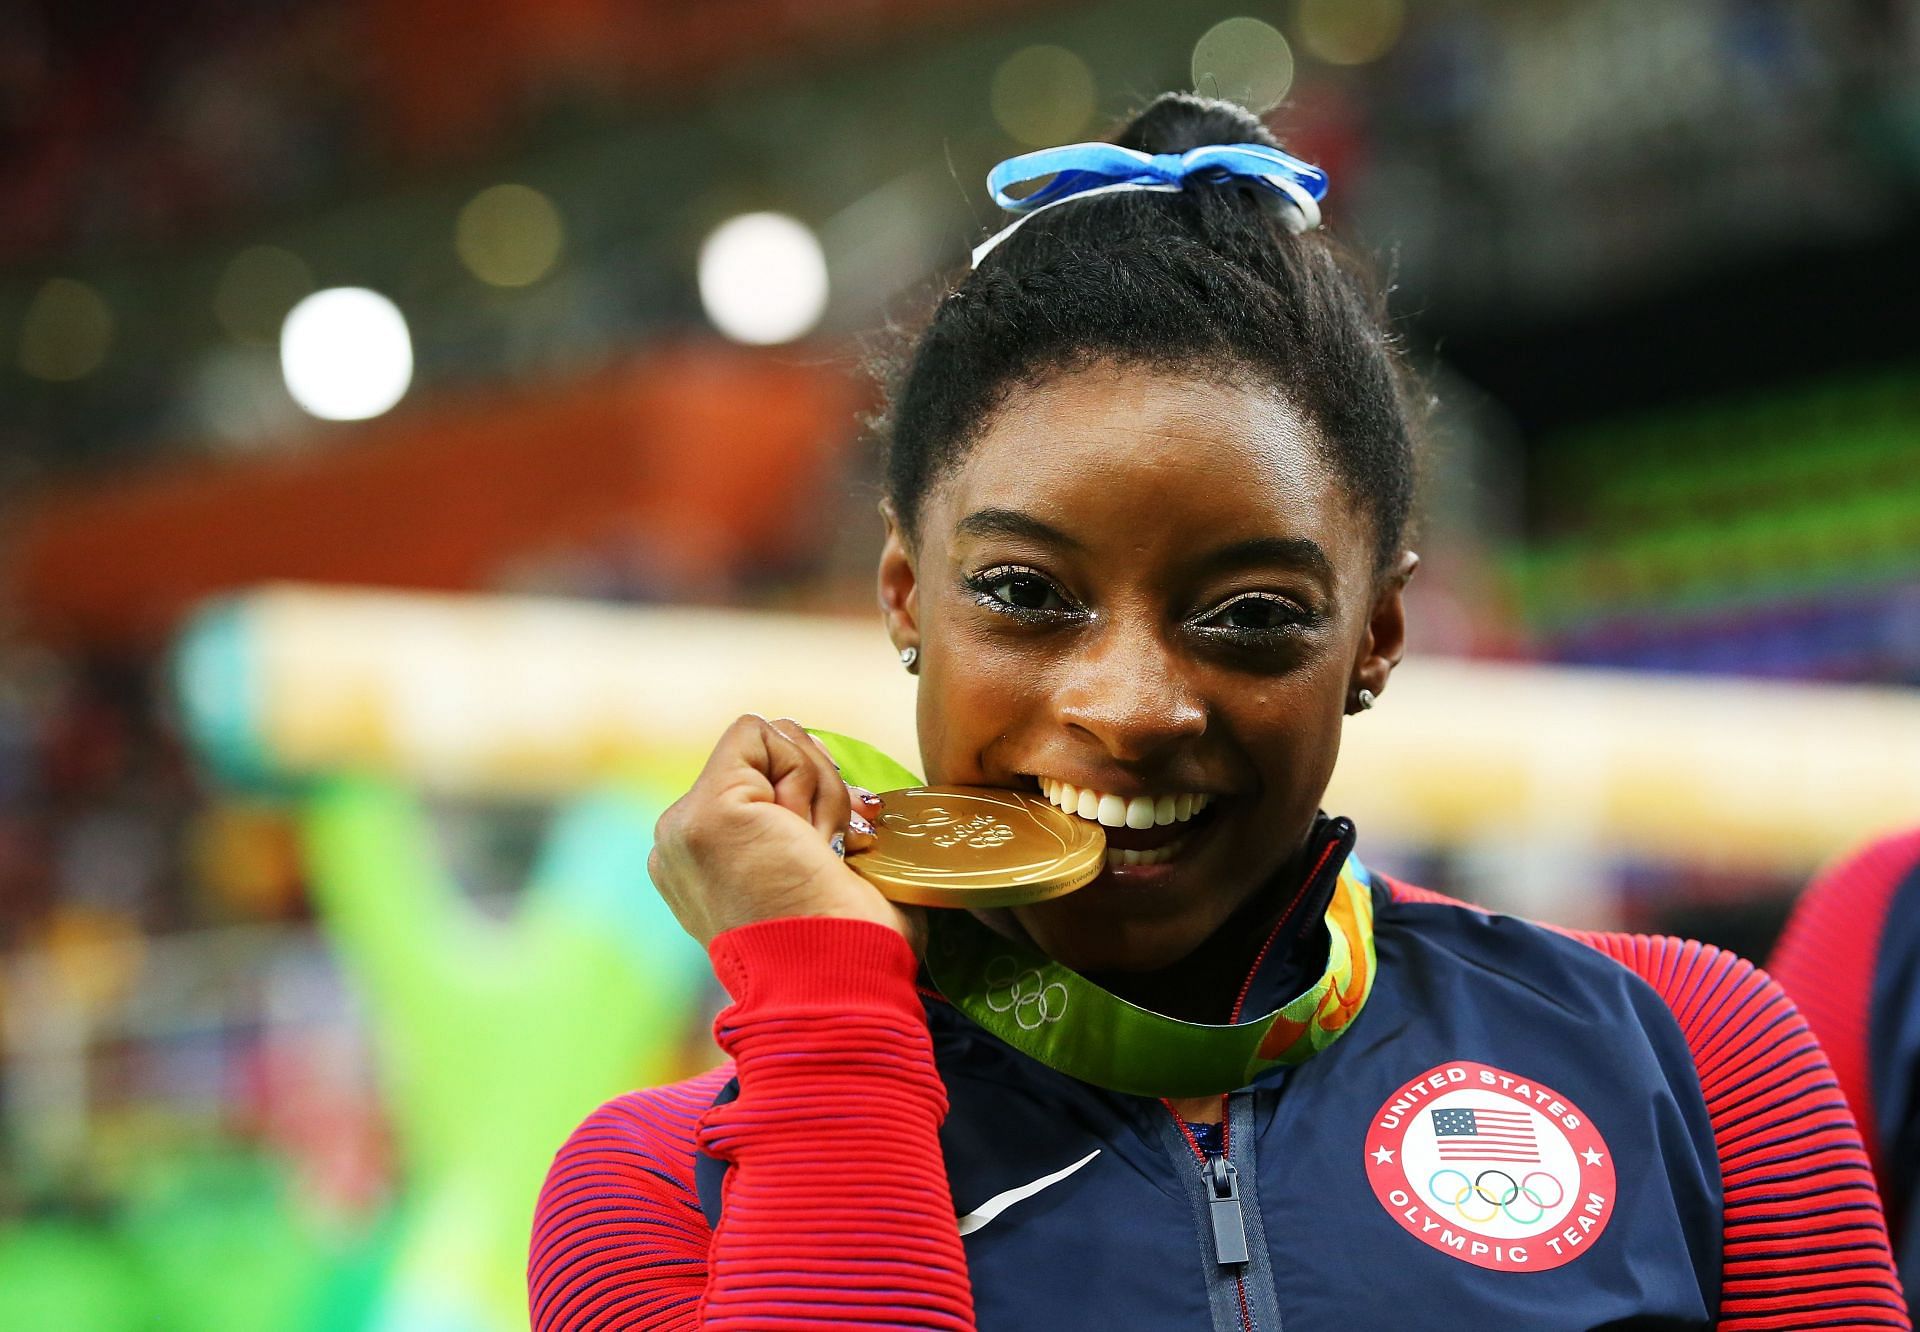 Gold medalist Simone Biles poses for photographs after the medal ceremony for the Women&#039;s Individual All-Around at the 2016 Rio Olympics in Brazil.